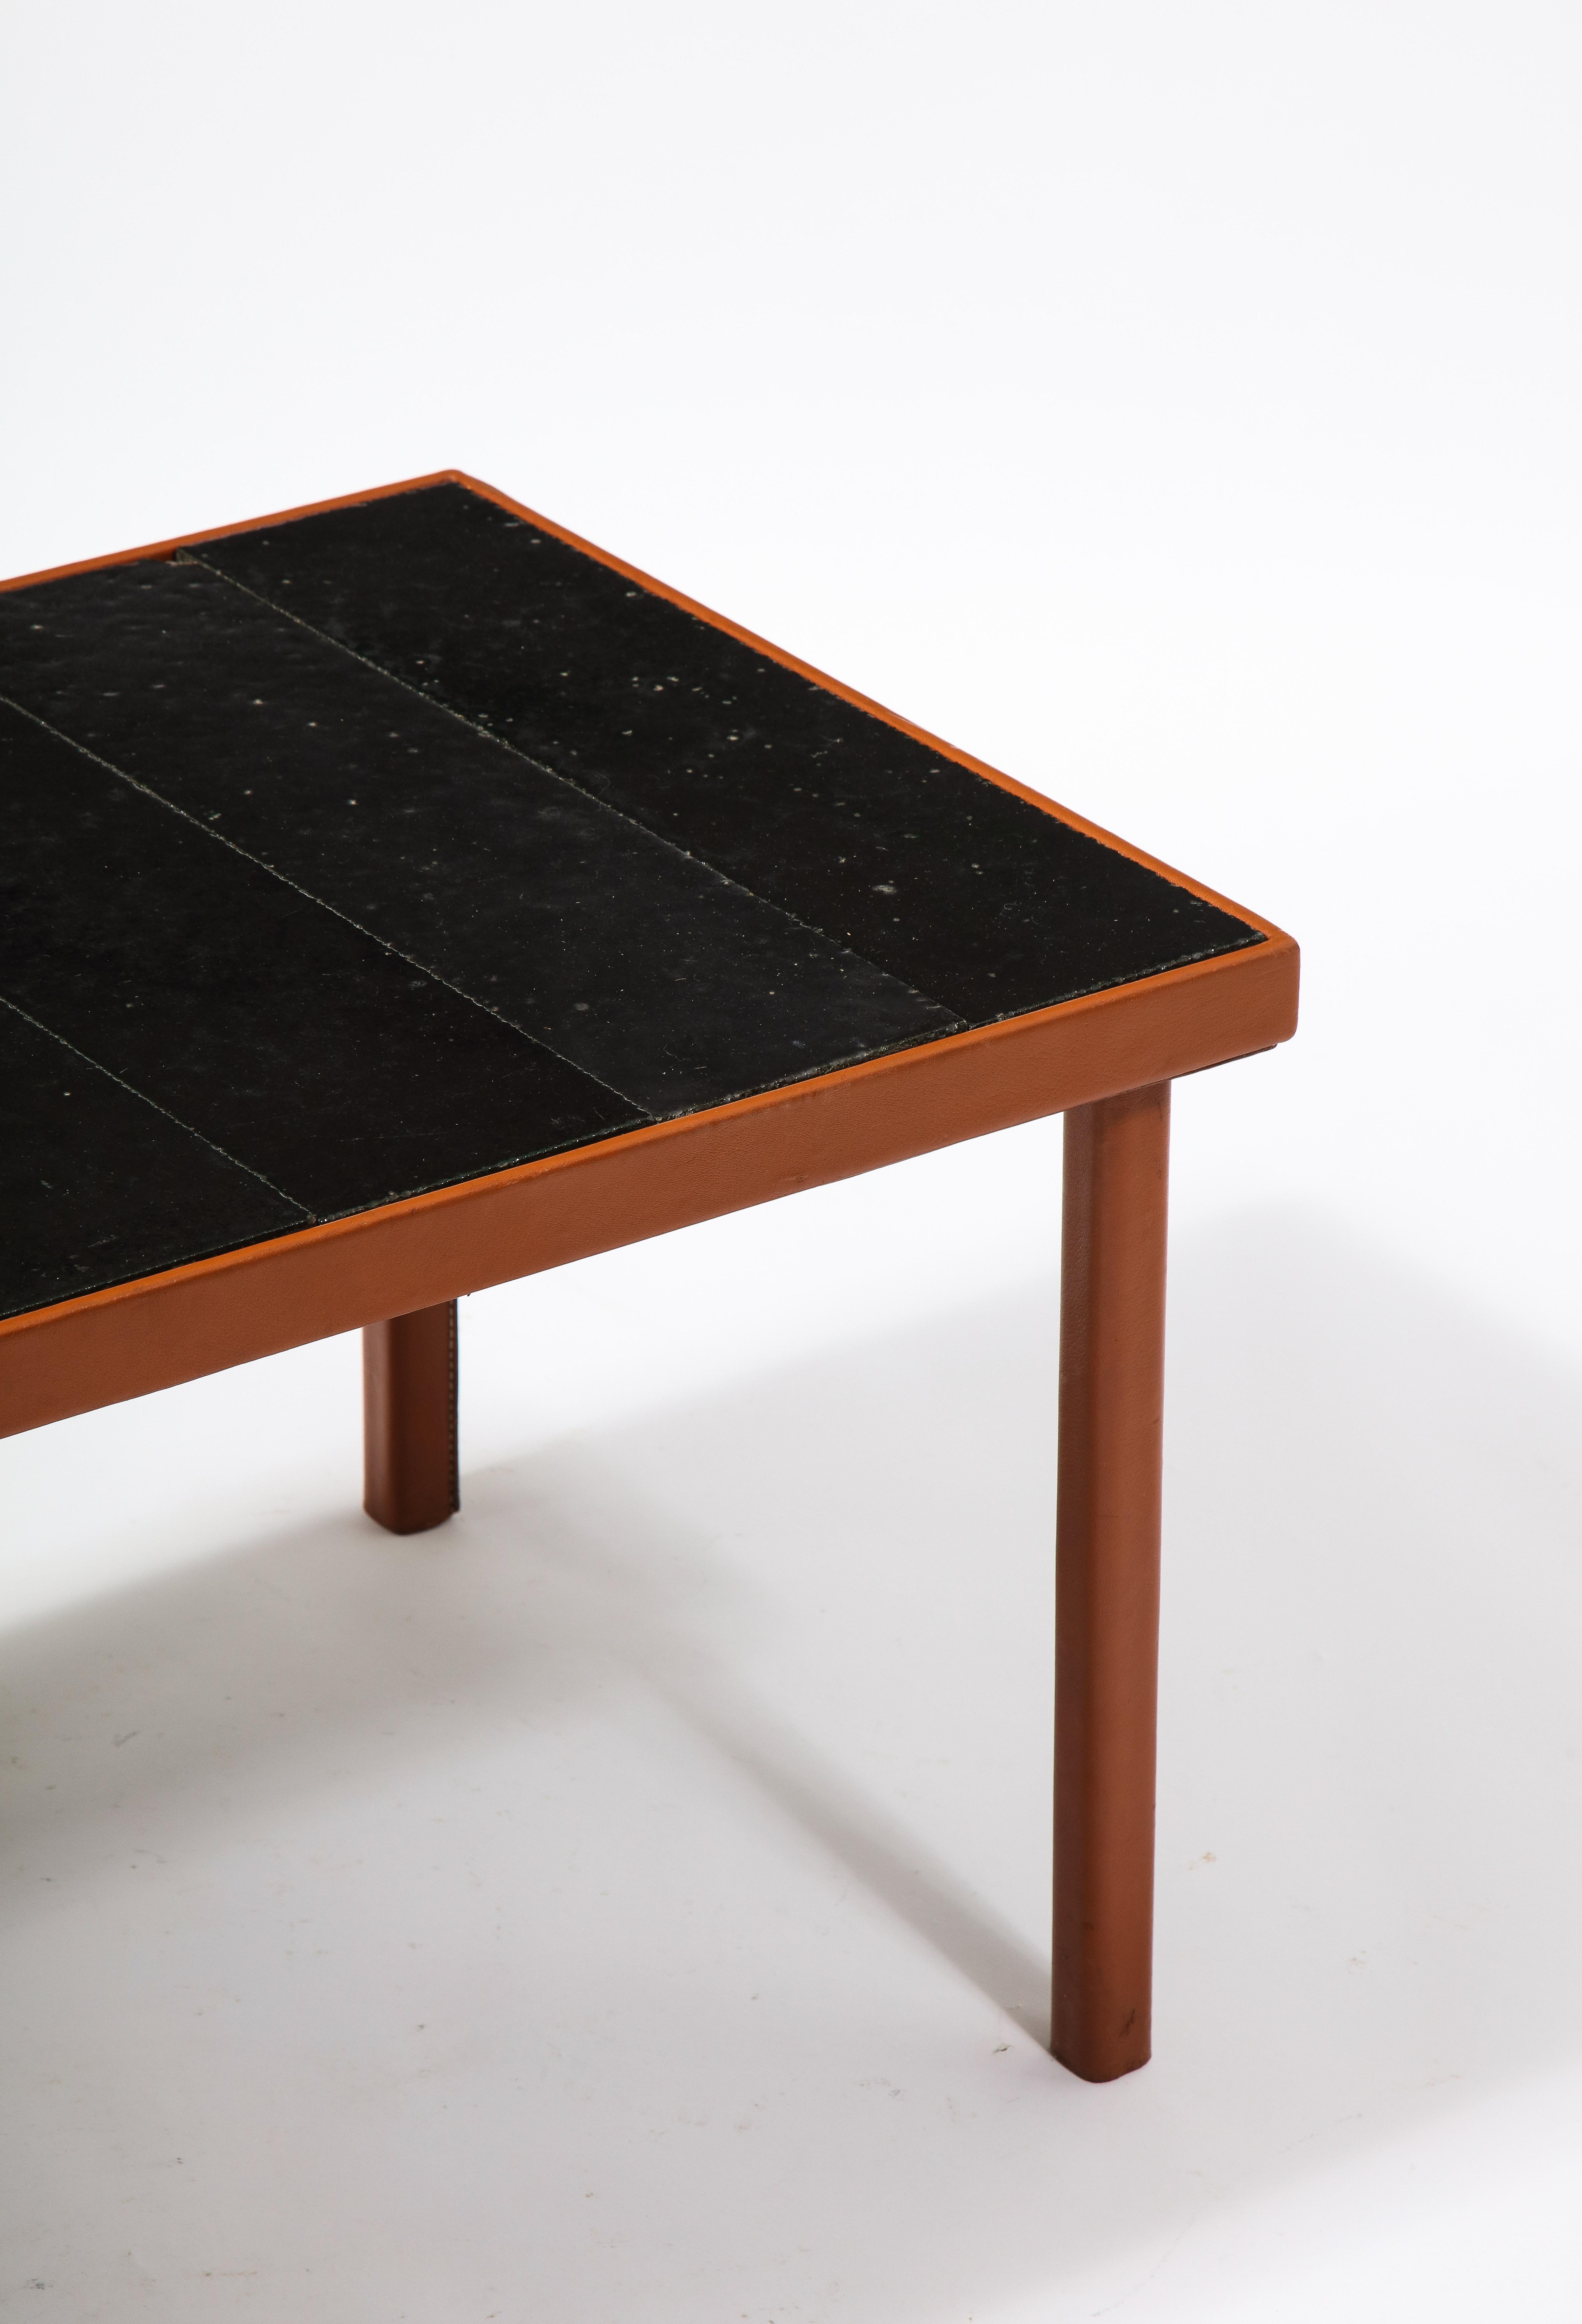 Adnet Style Leather & Dark Jouve Style Lava Stone Tiles Table, France 1950's For Sale 1